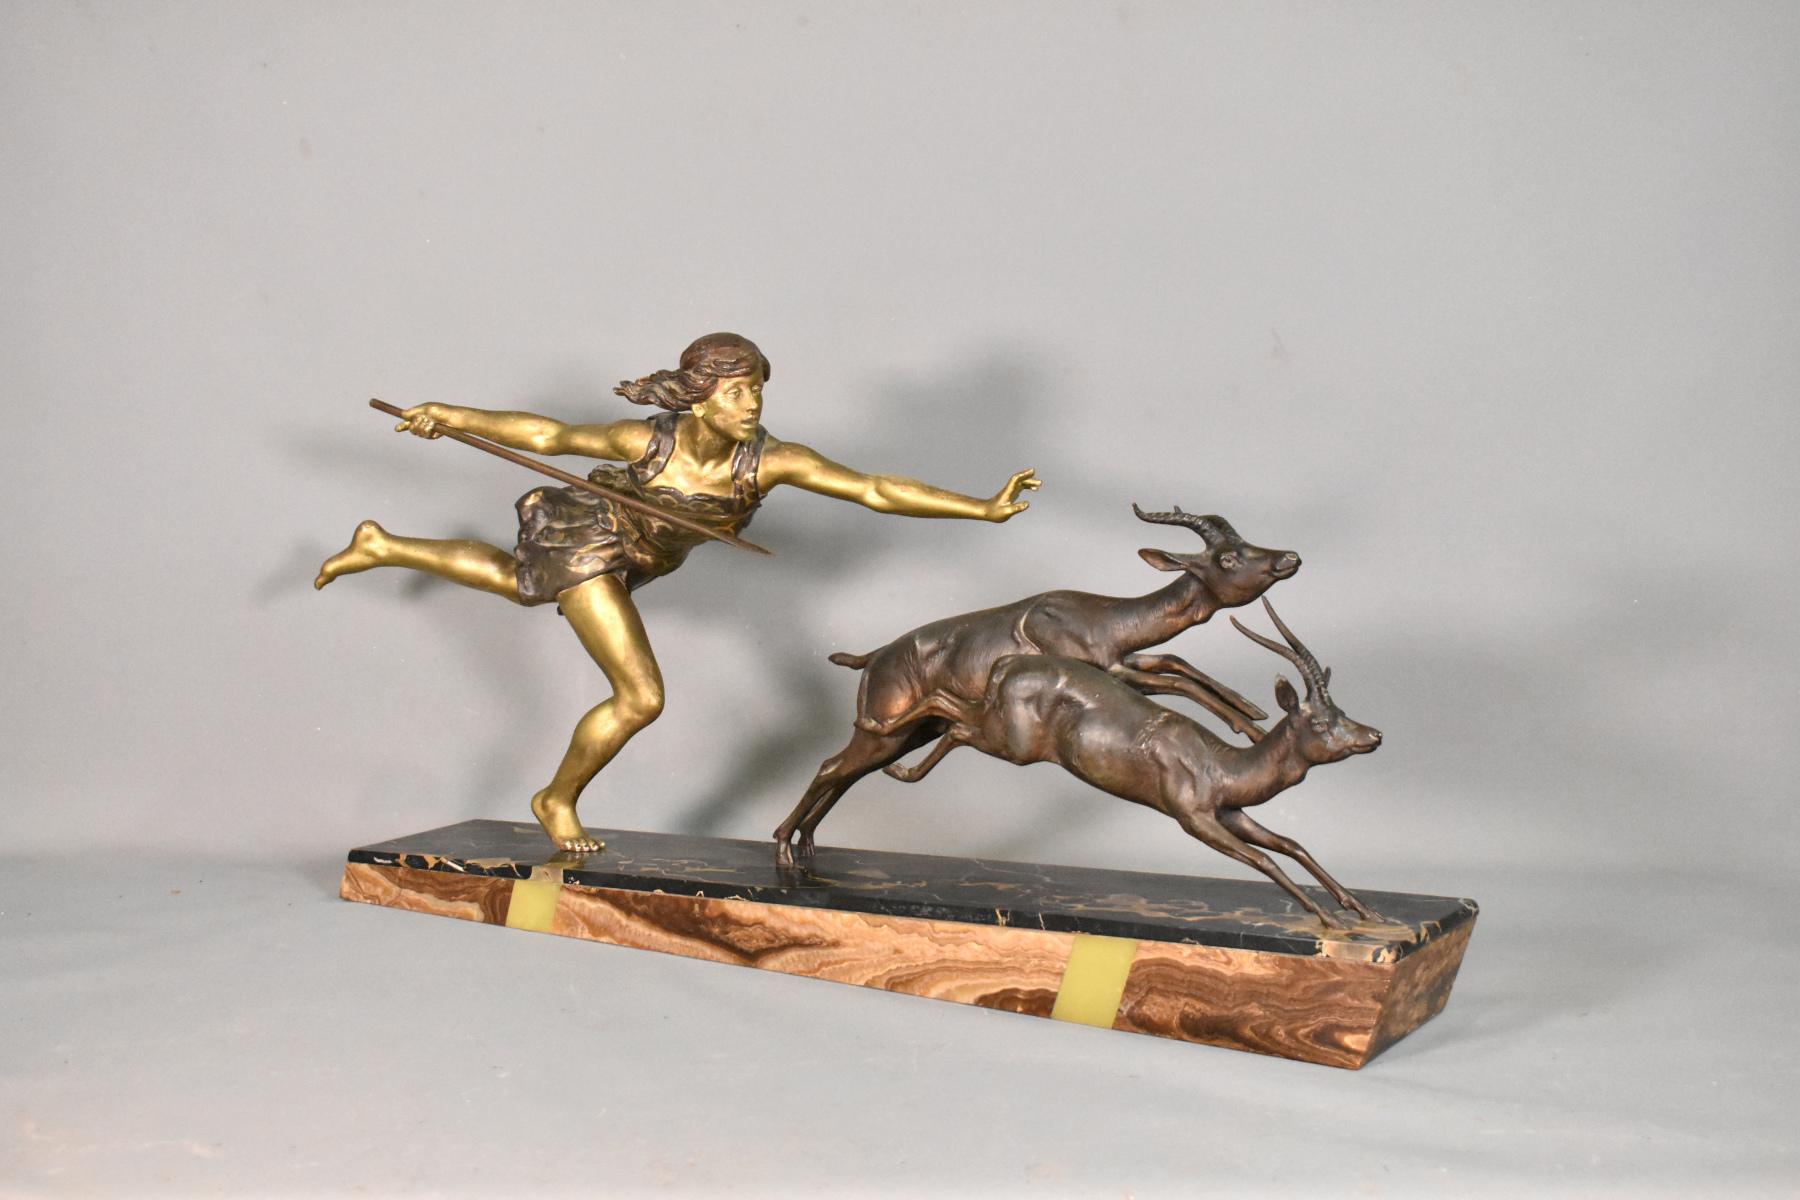 Large French Art Deco Sculpture Diana the Huntress Figurative Group by Emile Joseph Carlier. 

A large impressive scene of Diana the huntress hunting a pair of antelope. 

The figurines are mounted on a trapezoidal base of portico, marble and